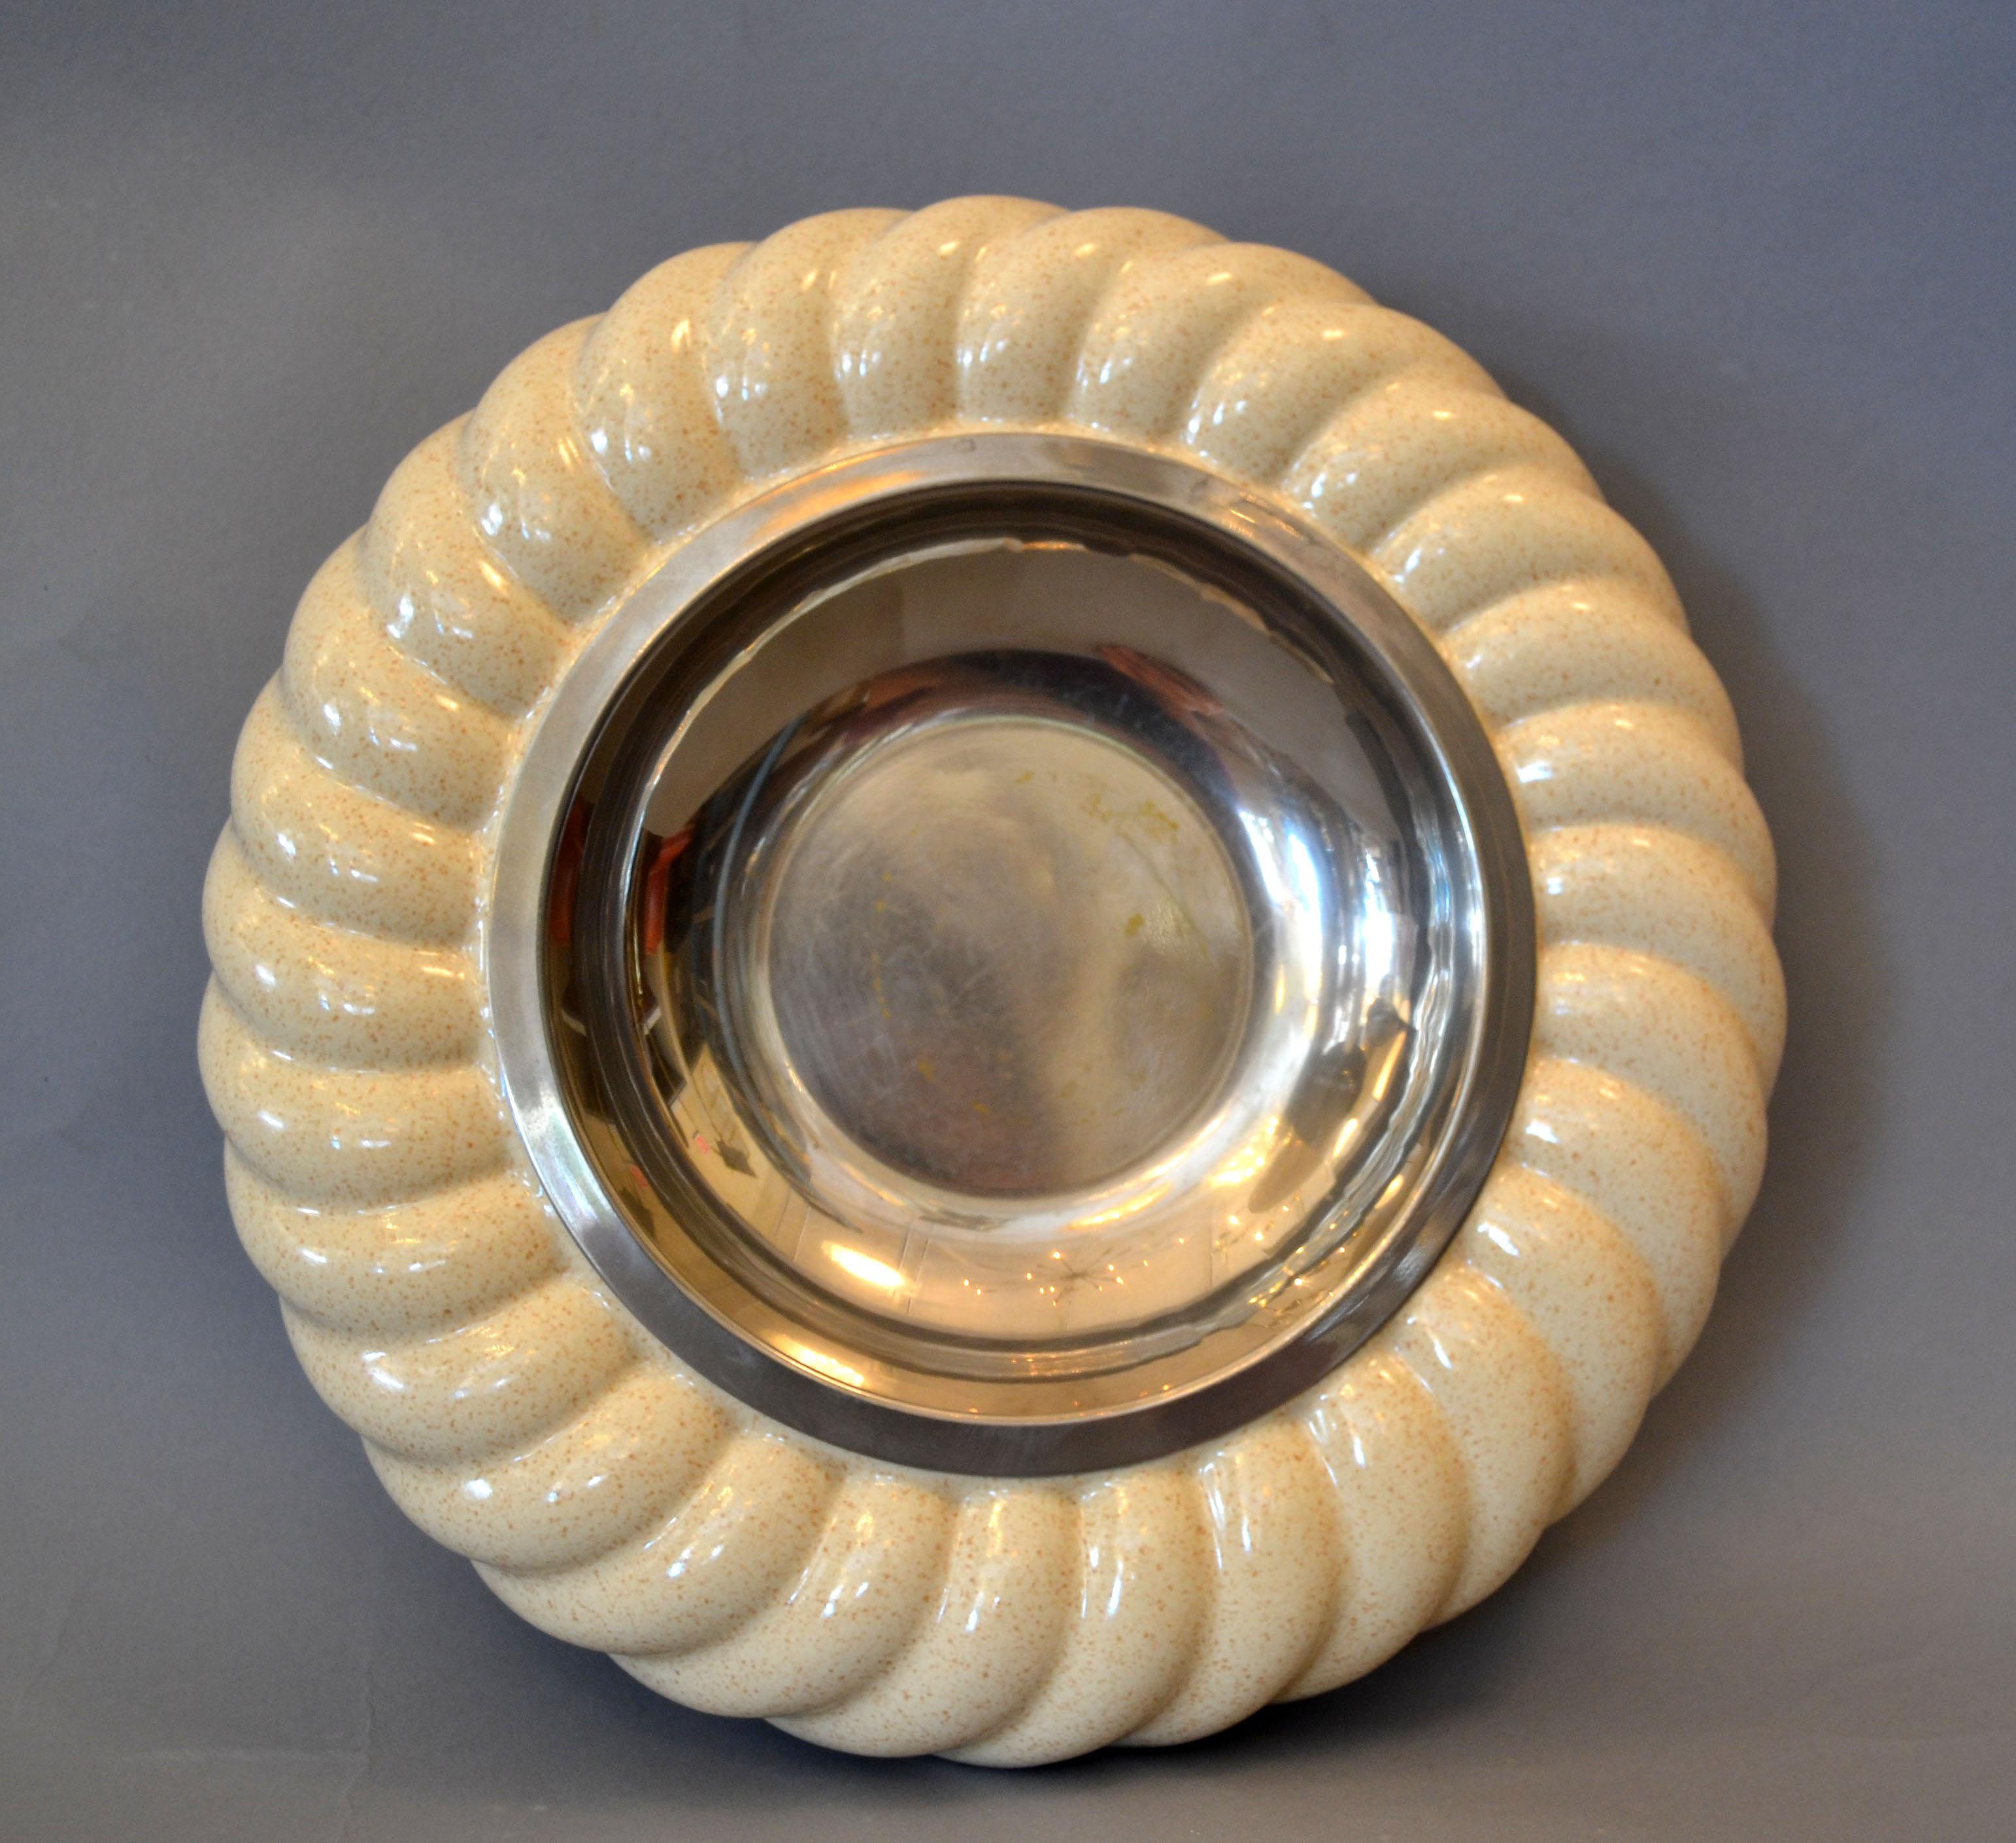 Mid-Century Modern ceramic and chrome ashtray, bowl, catchall in beige color.
Designed by Tommaso Barbi and manufactured for Barbi by B. Ceramiche in the late 1960s.
Makers Mark and parts from foil label underneath.
This dish is a lovely desk